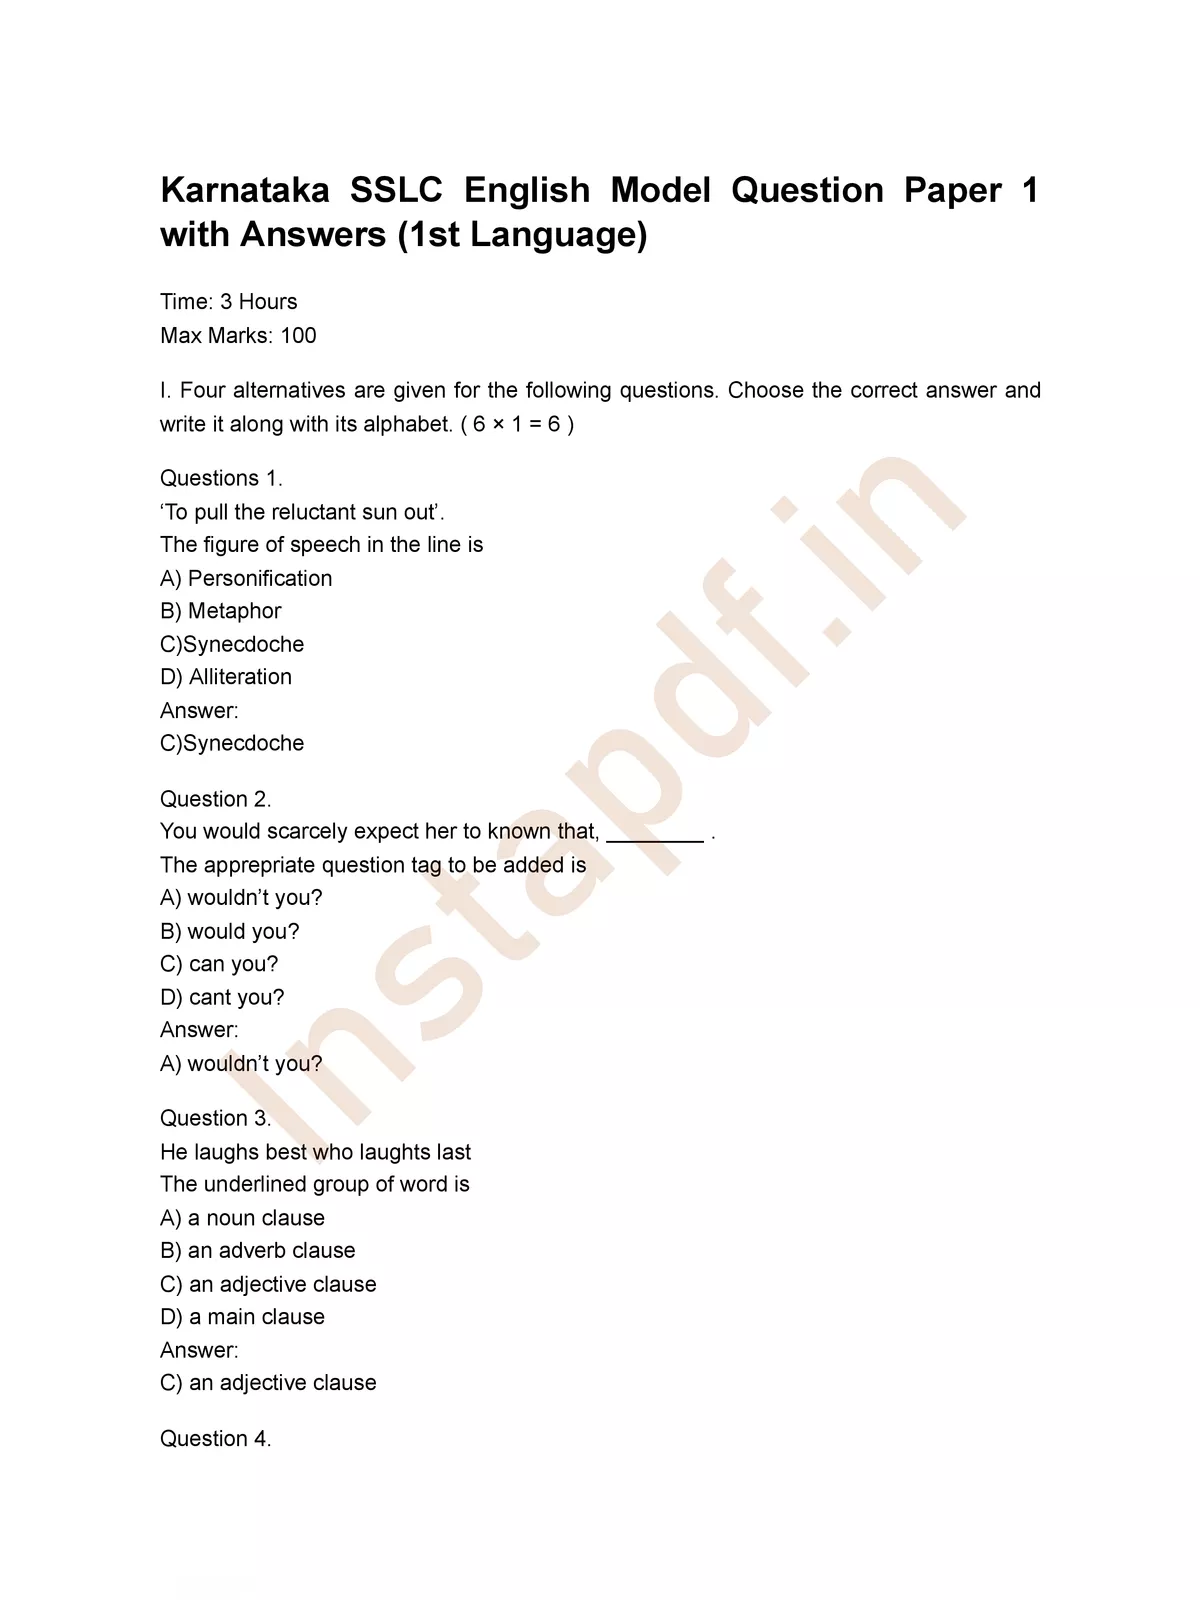 SSLC English Question Paper with Answers 2022